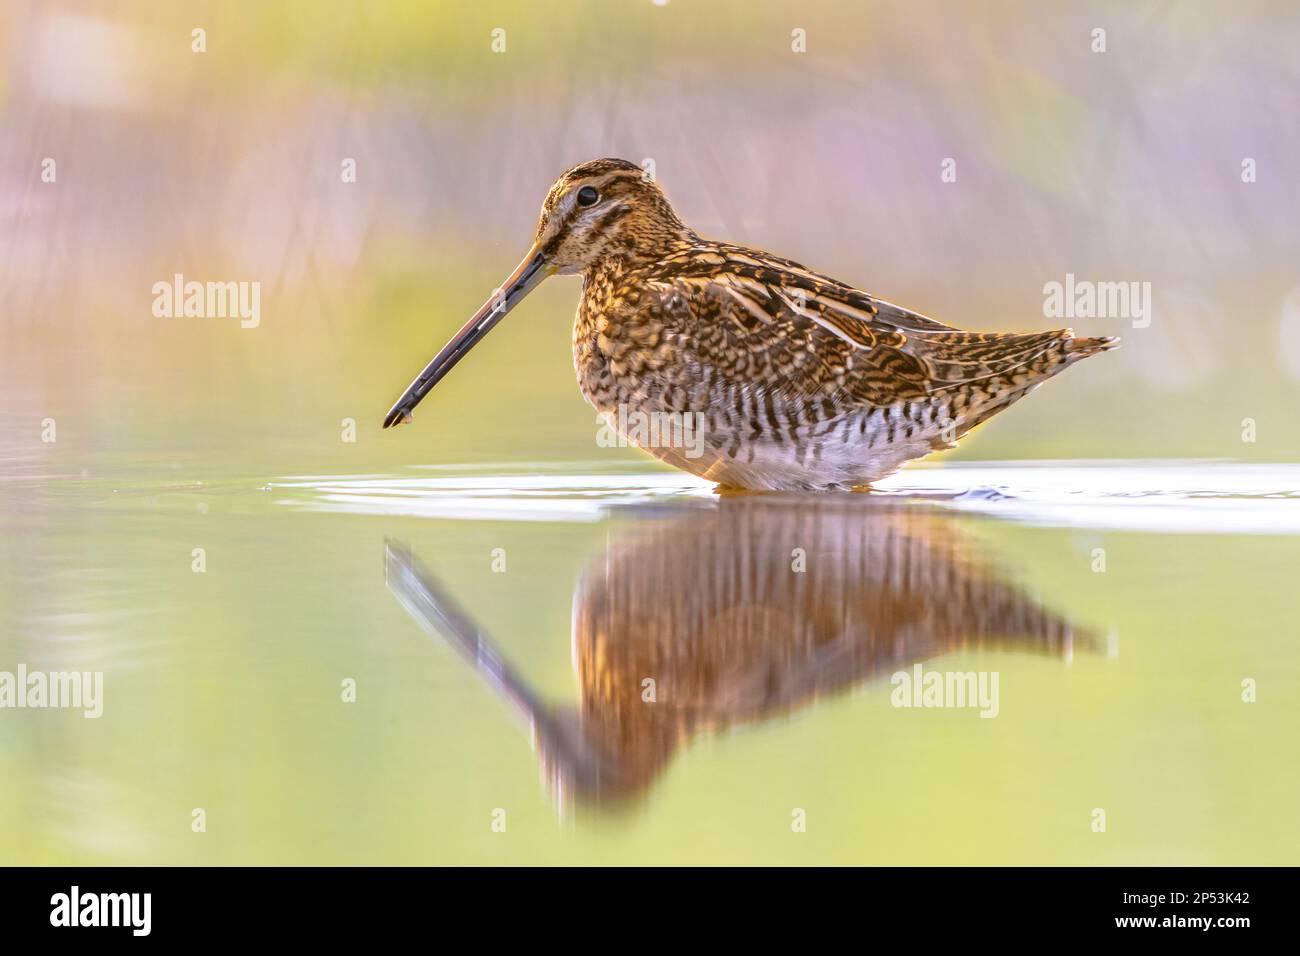 Common snipe (Gallinago gallinago) is a small, stocky wader bird native to the Old World. Breeding habitats are marshes, bogs, tundra and wet meadows Stock Photo